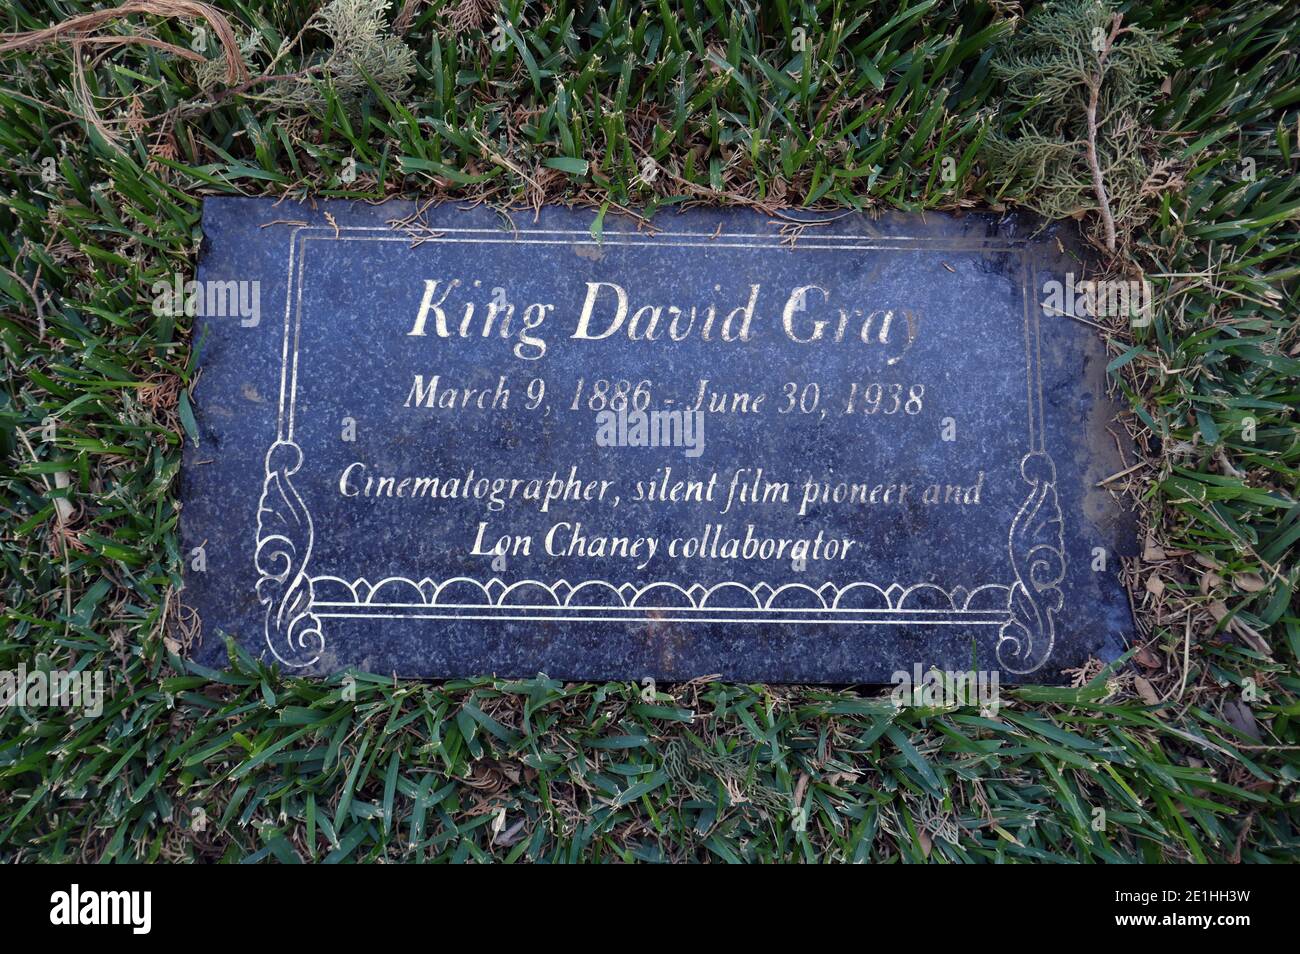 Hollywood, California, USA 30th December 2020 A general view of atmosphere of cinematographer King David Gray's Grave at Hollywood Forever Cemetery on December 30, 2020 in Hollywood, California, USA. Photo by Barry King/Alamy Stock Photo Stock Photo